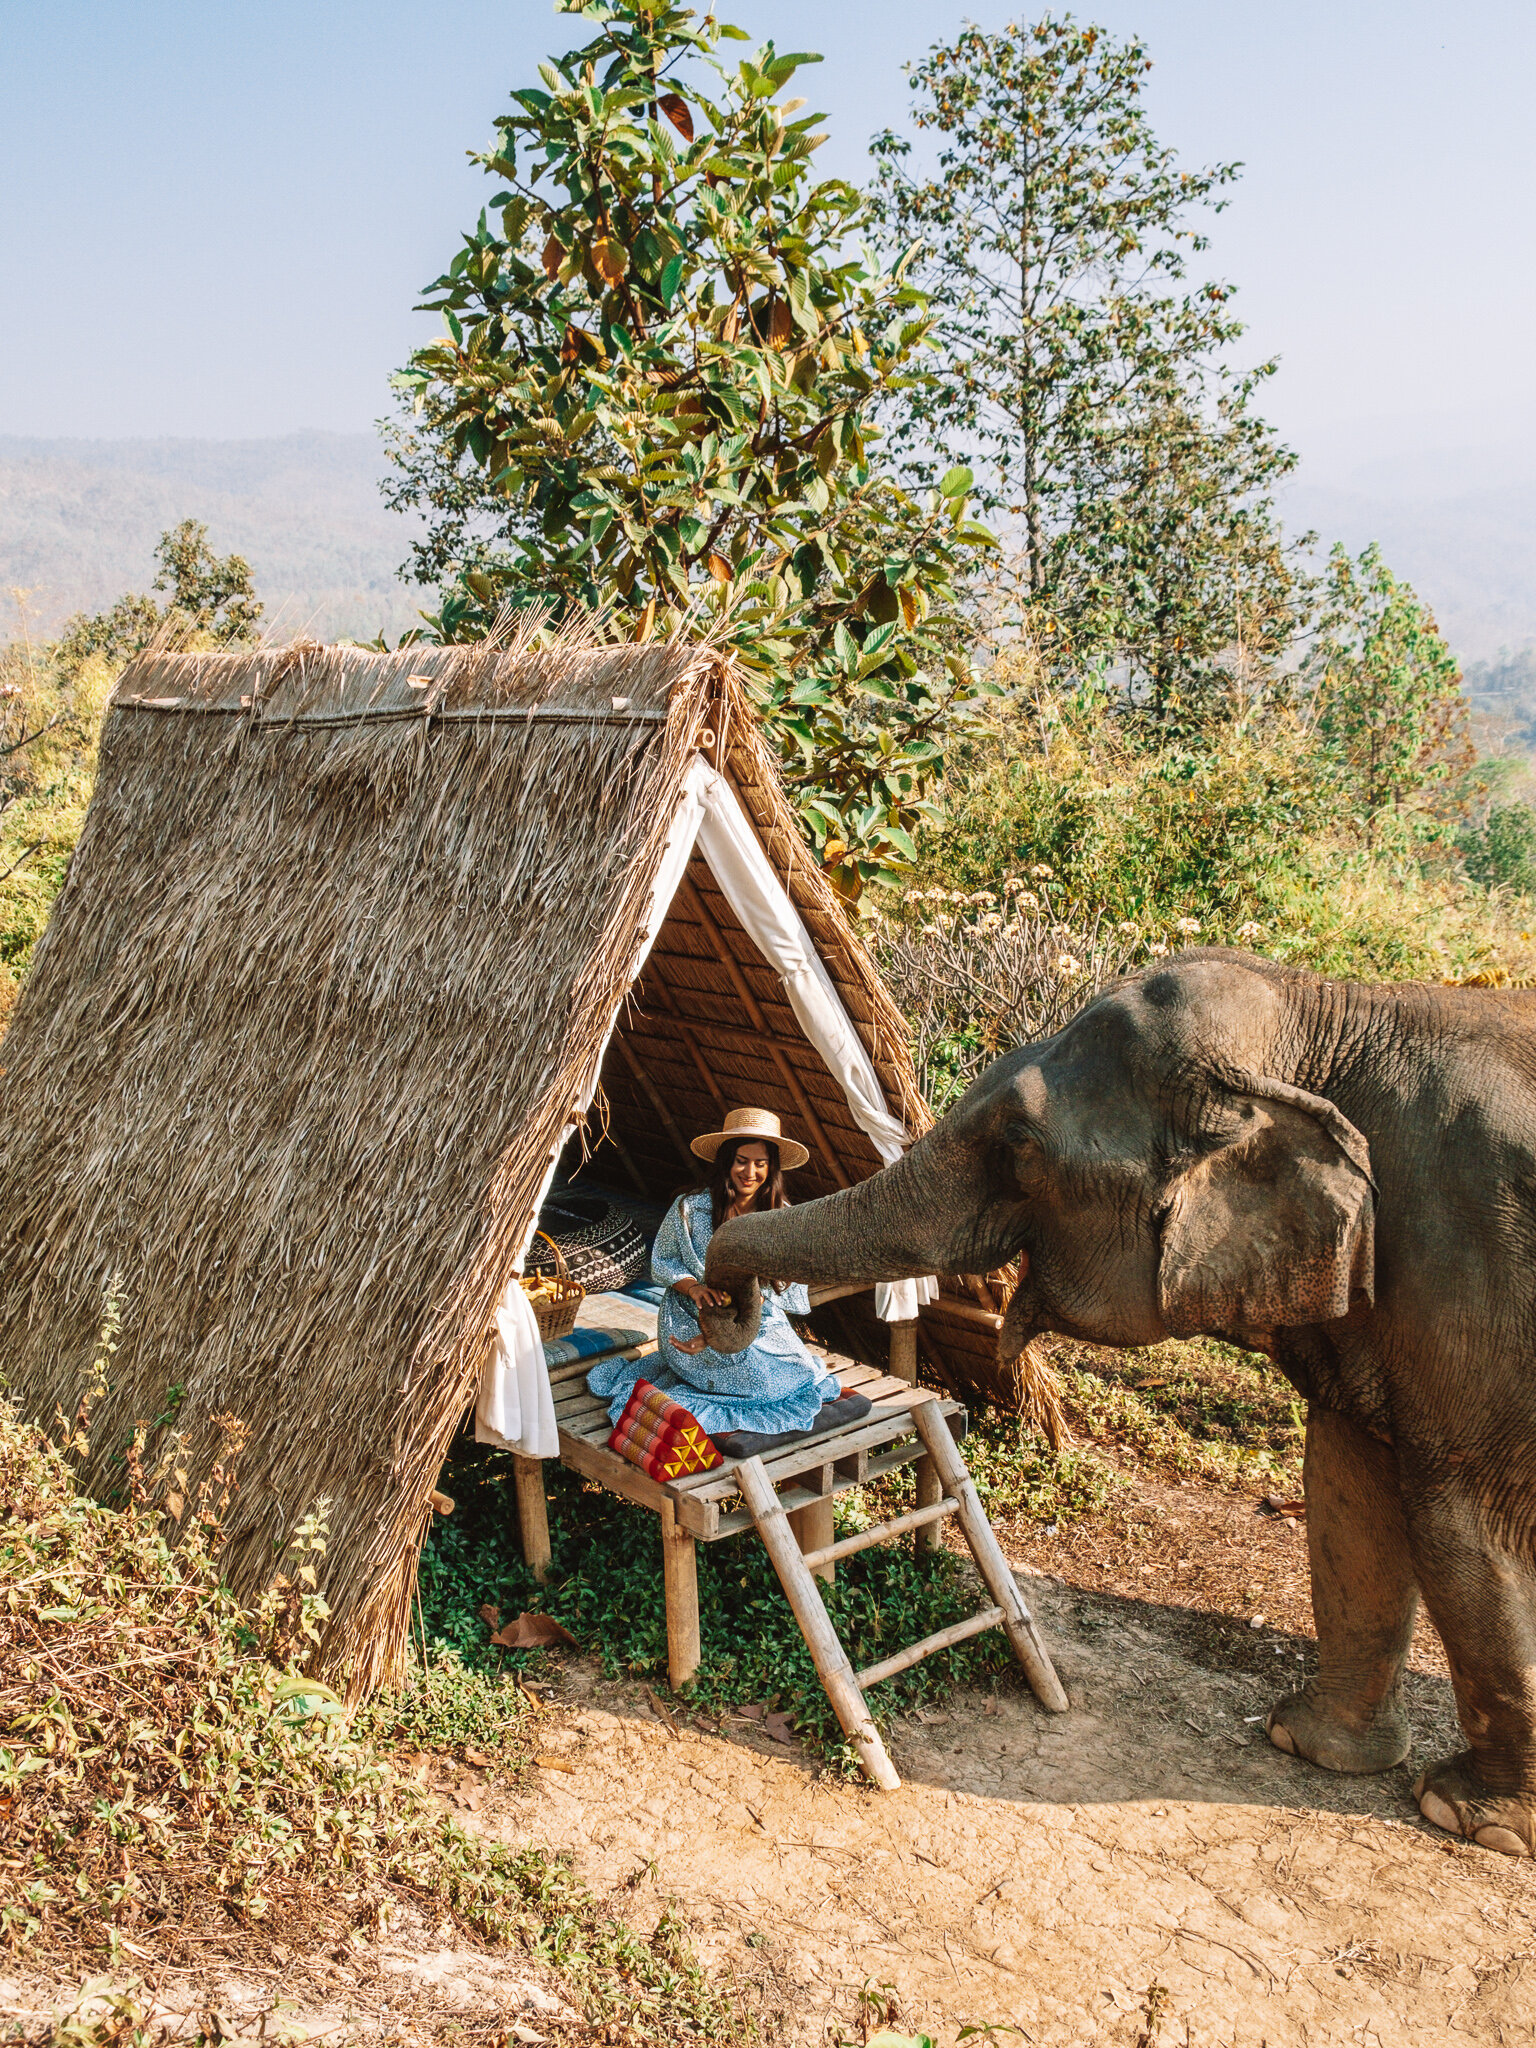 Chai Lai Orchid Eco Lodge In Chiang Mai  With Elephants